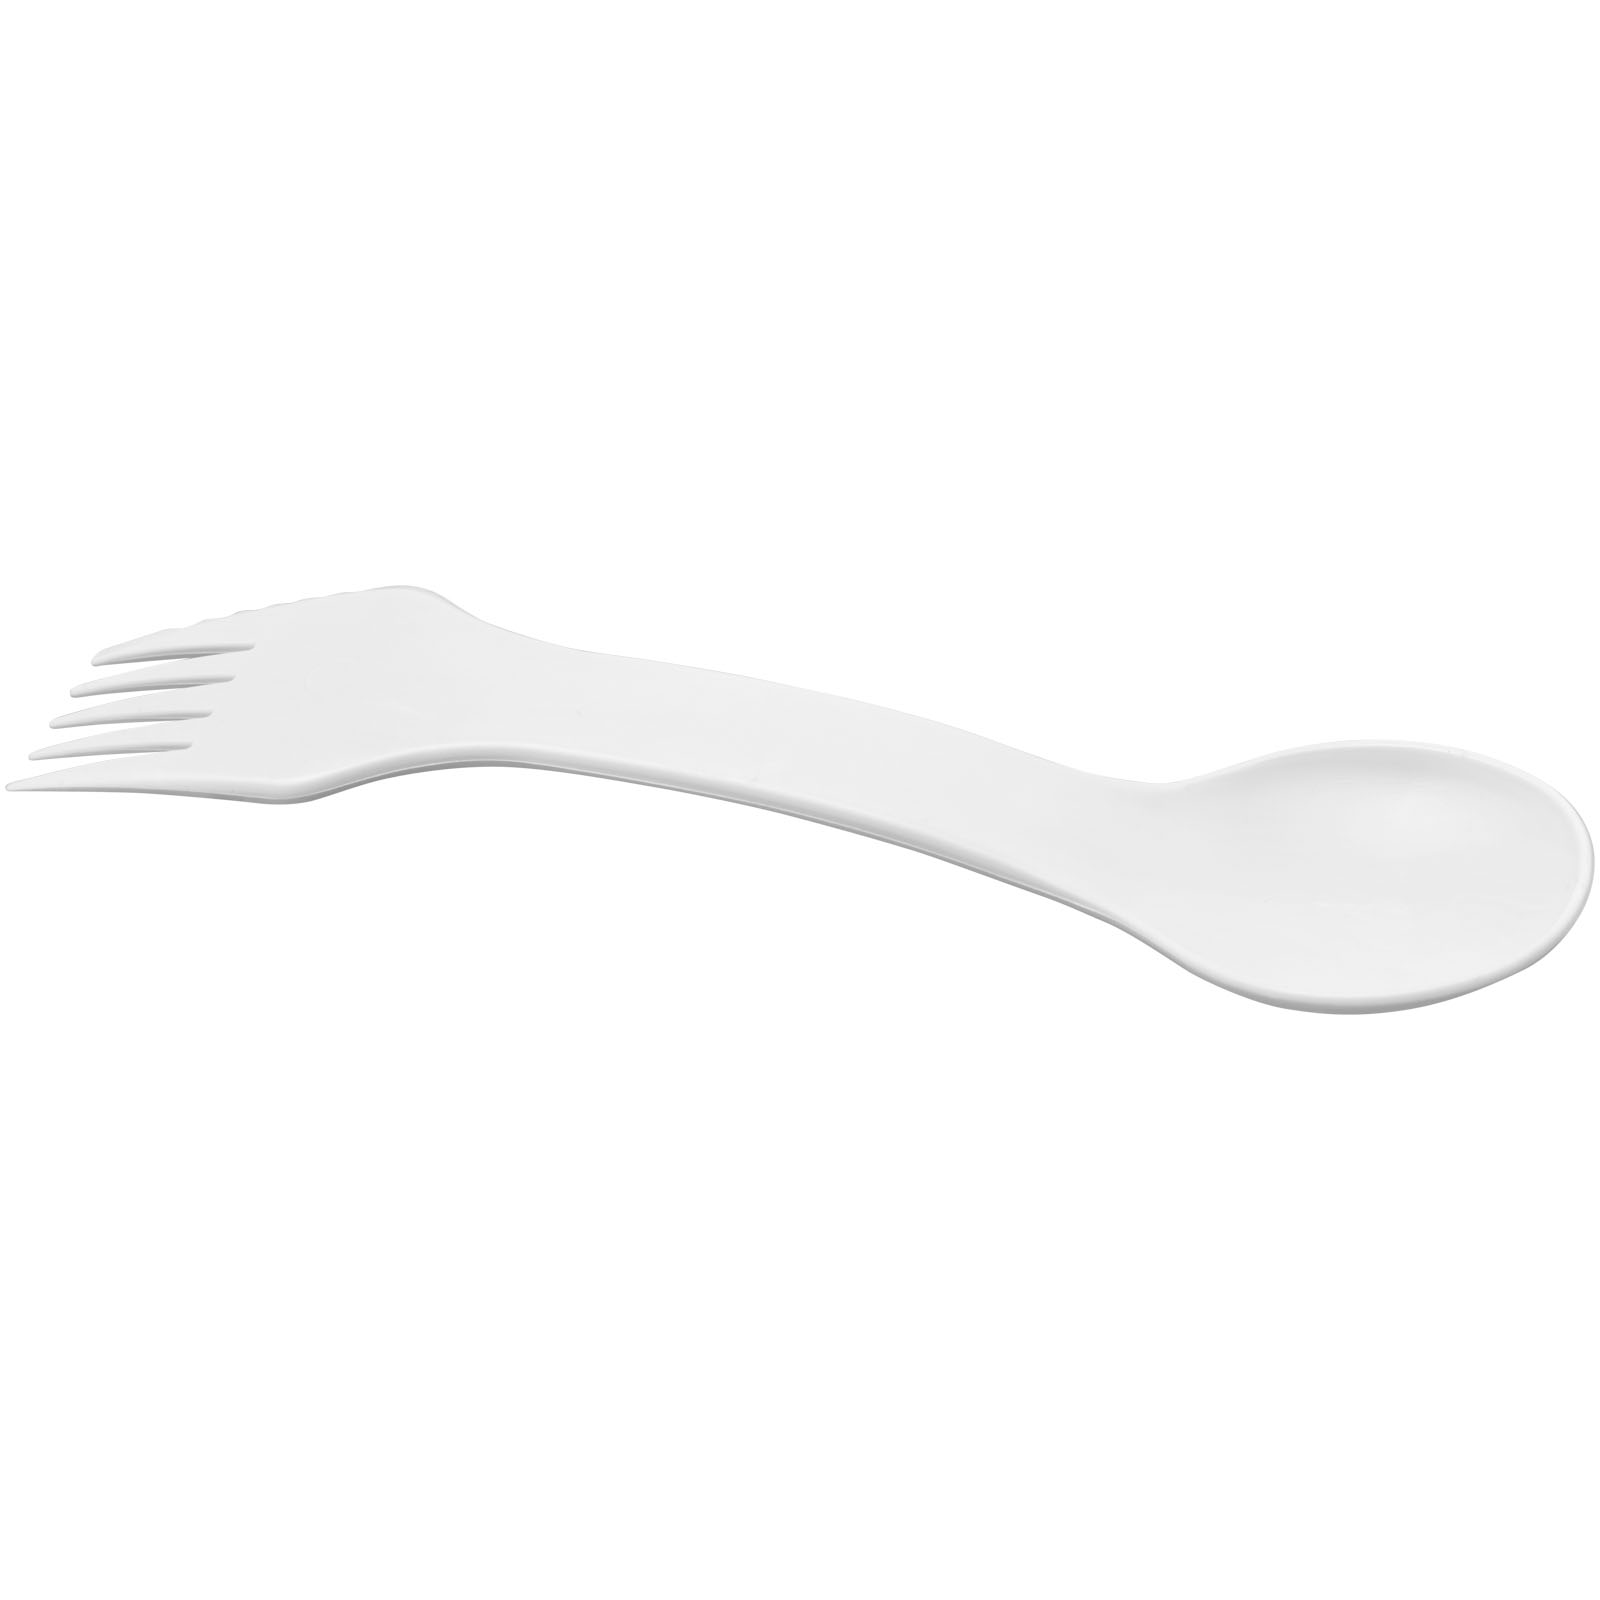 Picnic Accessories - Epsy Pure 3-in-1 spoon, fork and knife